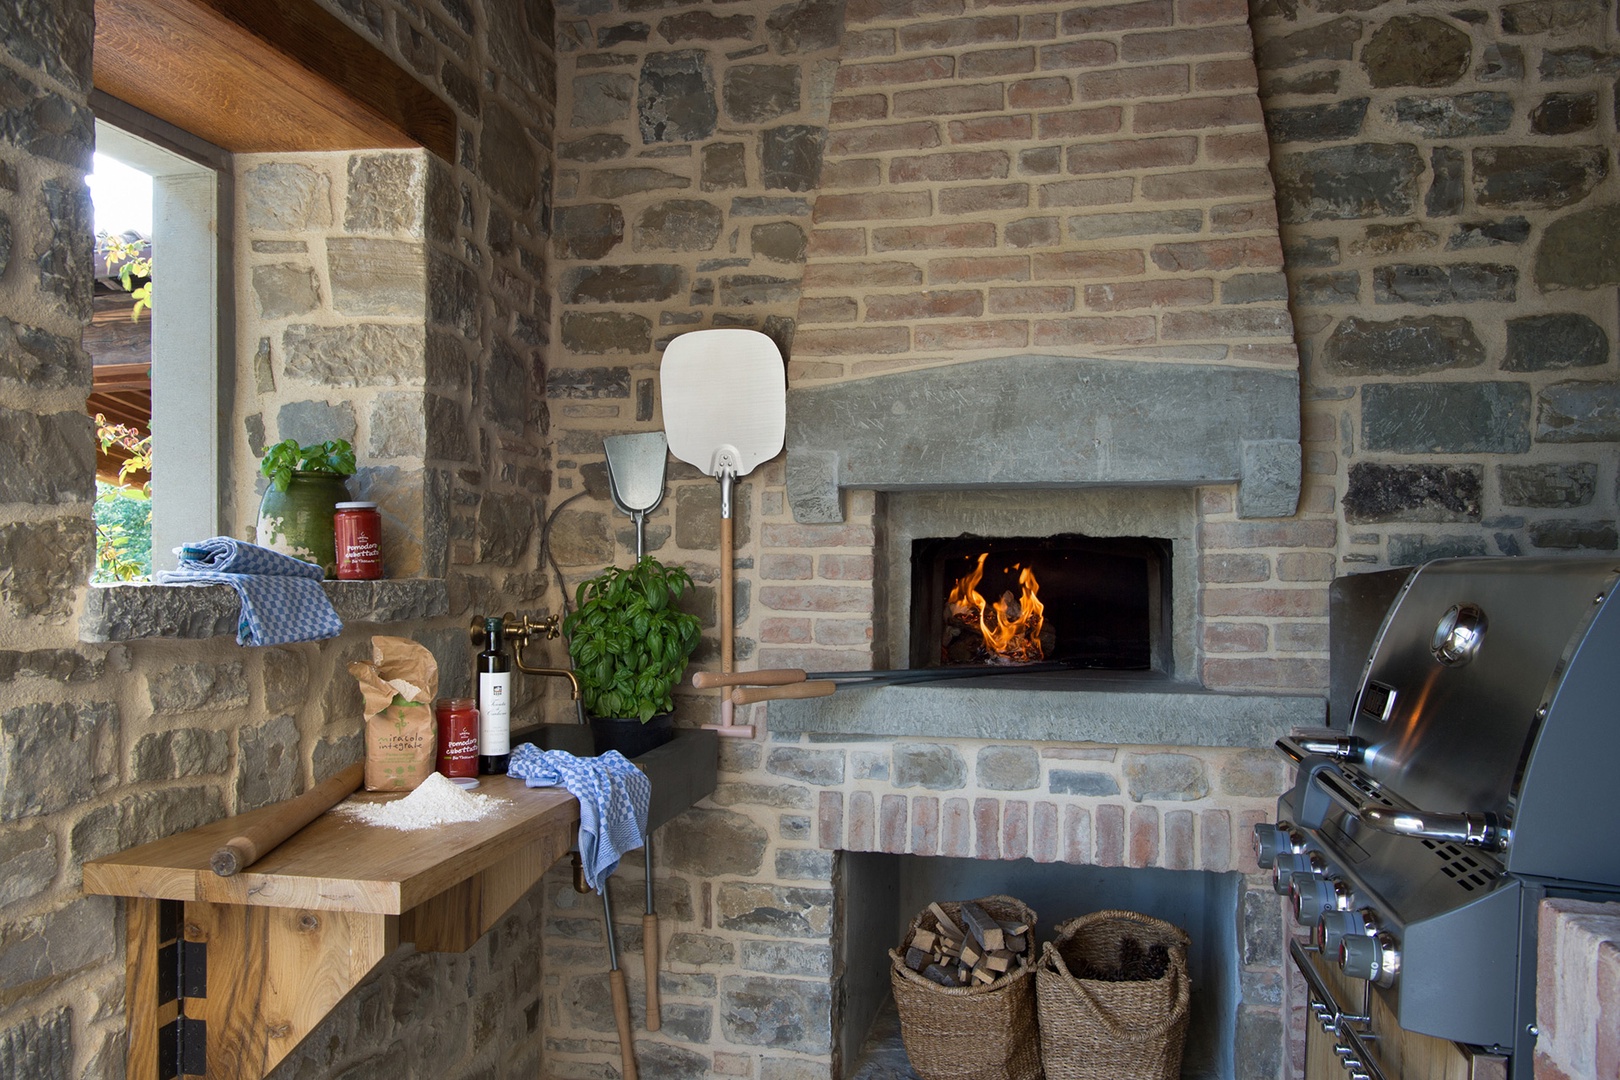 Enjoy fresh homemade pizza from this brick oven